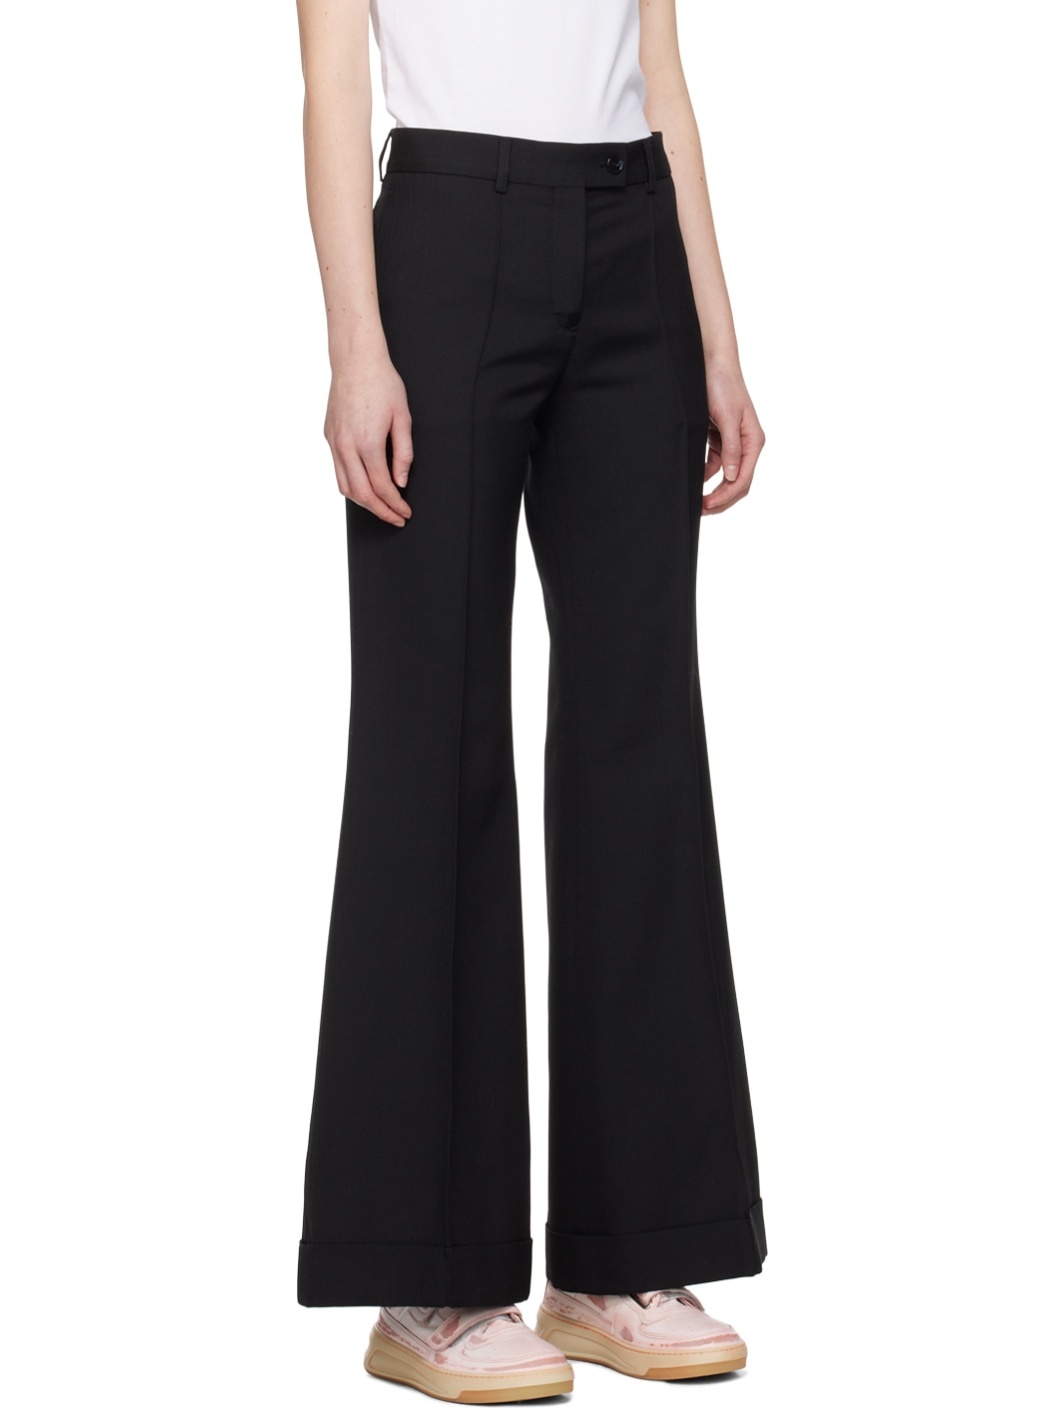 Black Tailored Trousers - 2